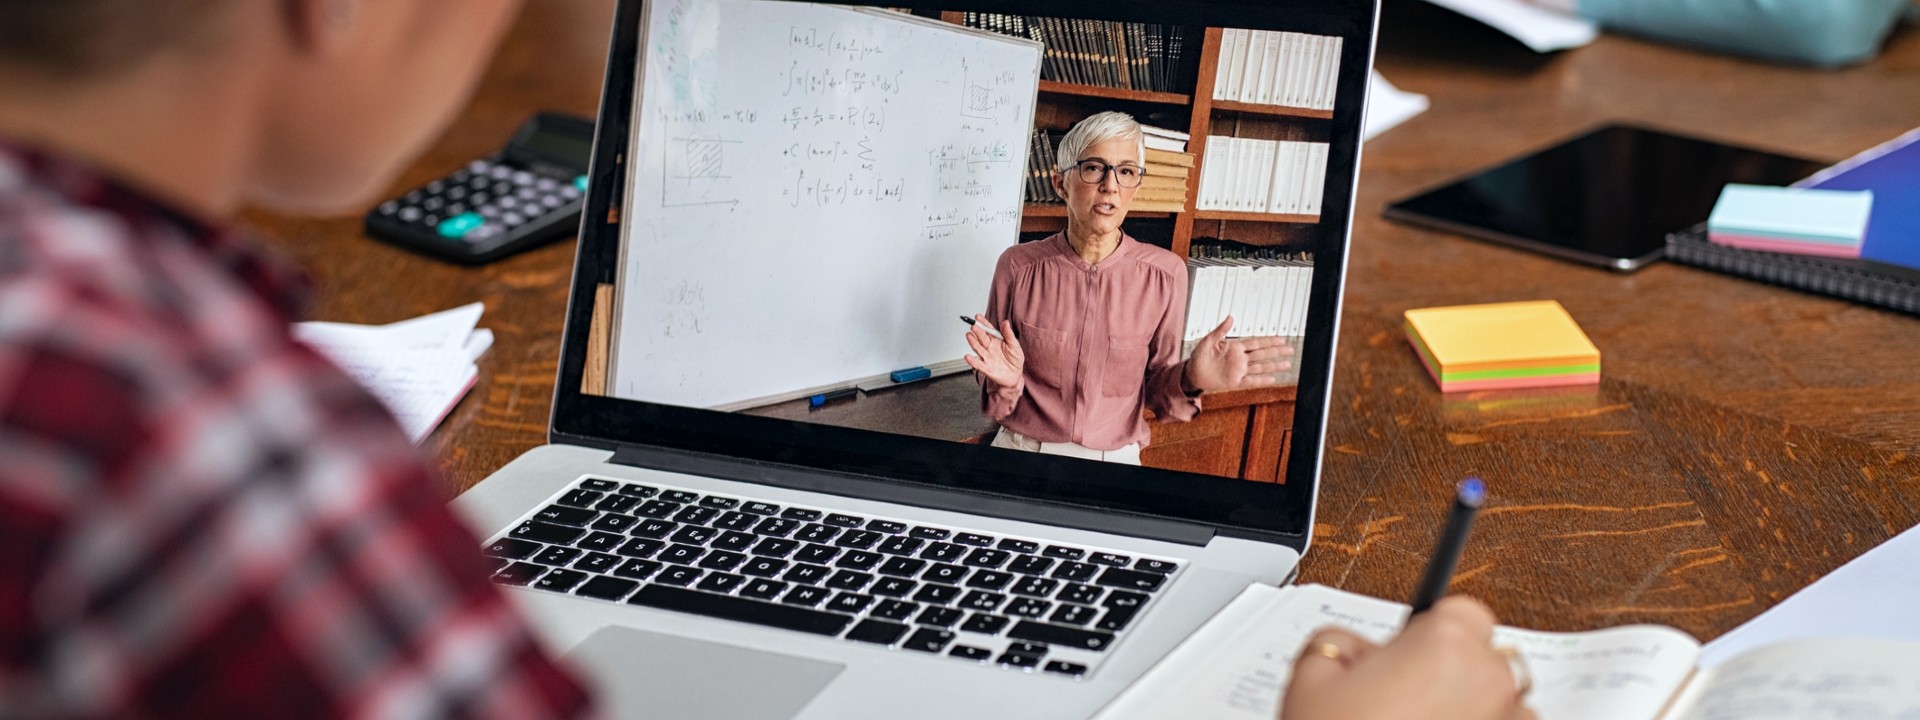 Laptop showing professor giving remote lecture